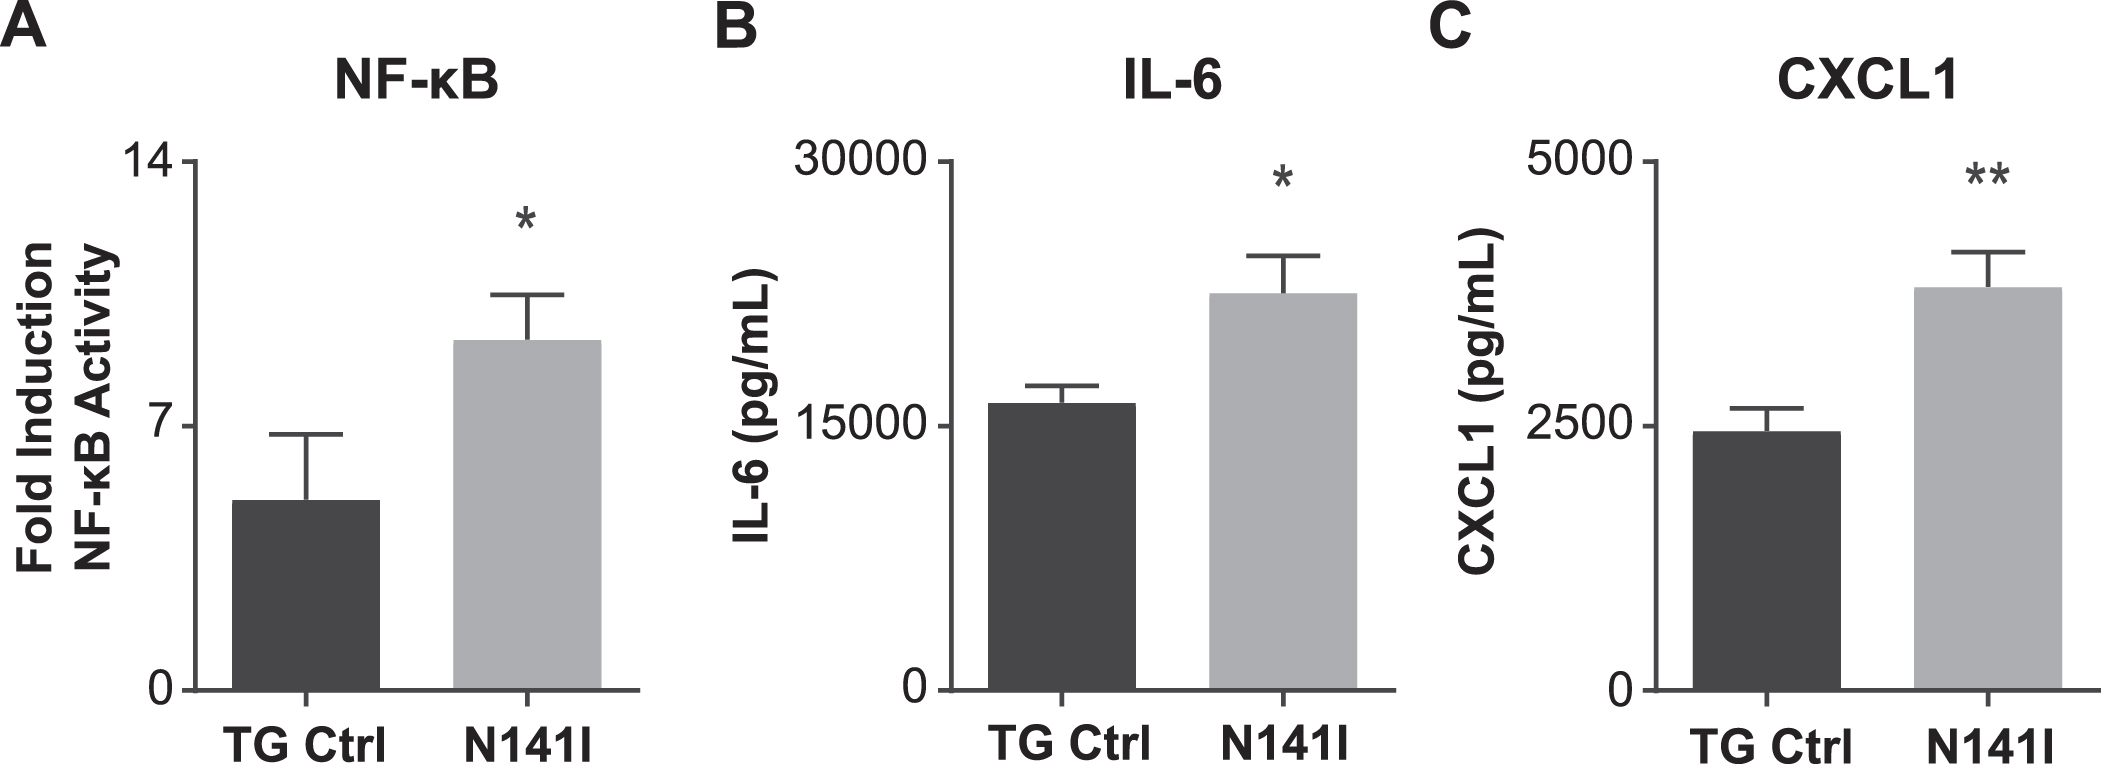 NFκB transcriptional activity and inflammatory cytokine/chemokine secretion is enhanced in PS2 N141I microglia in response to LPS stimulation. A) Transgenic control (TG Ctrl) and PS2 N141I (N141I) microglia were transduced with lentiviral NFκB assay constructs. Forty-eight hours post transduction, microglia were exposed to 100 ng/mL LPS for 4 h and NFκB activity was measured by a luciferase reporter assay. PS2 N141I microglia show increased NFκB induction compared TG Ctrl. Data are mean±SEM, n = 4 and represent experiments from independent cultures, *p < 0.05, t-test analysis. Transgenic control (TG Ctrl) and PS2 N141I (N141I) primary microglia were stimulated with 100 ng/mL LPS for 24 h. B) IL-6 and C) KC (CXCL1) were significantly elevated in cell supernatants from PS2 N141I microglia relative to TG Ctrl as measured by multiplex cytokine assay. Data are mean±SEM, n = 4 and represent experiments from independent cultures, *p≤0.05, t-test analysis.